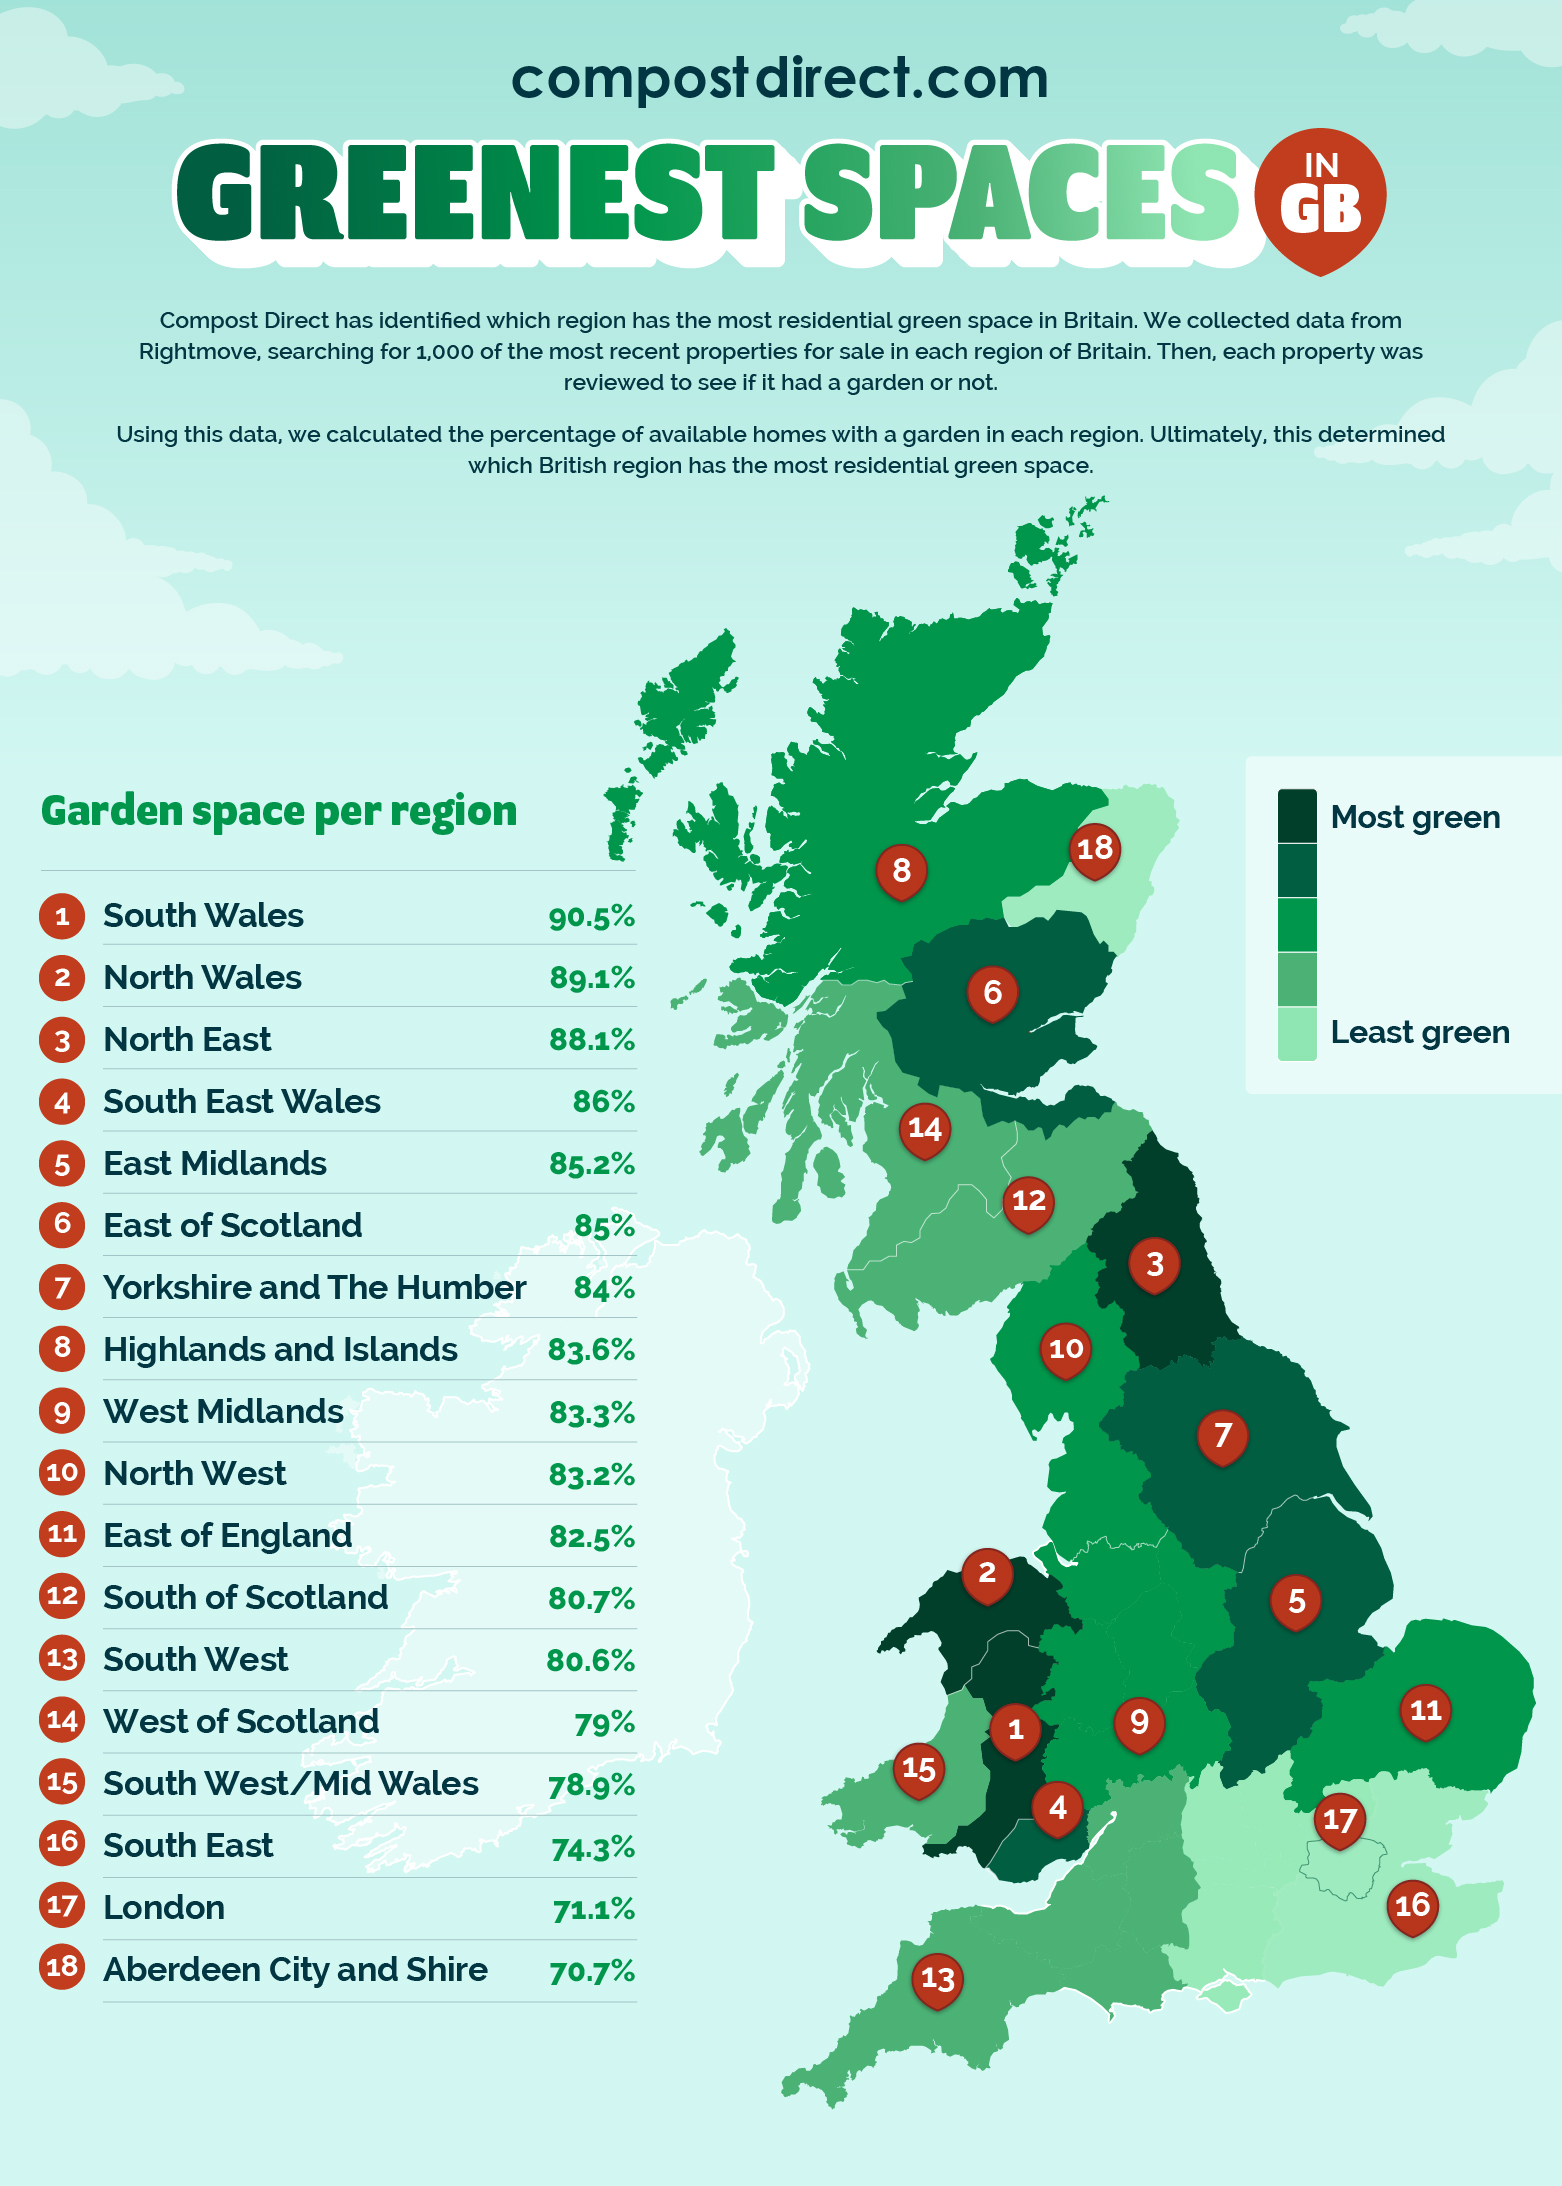 Greenest spaces in Great Britain from Compost Direct